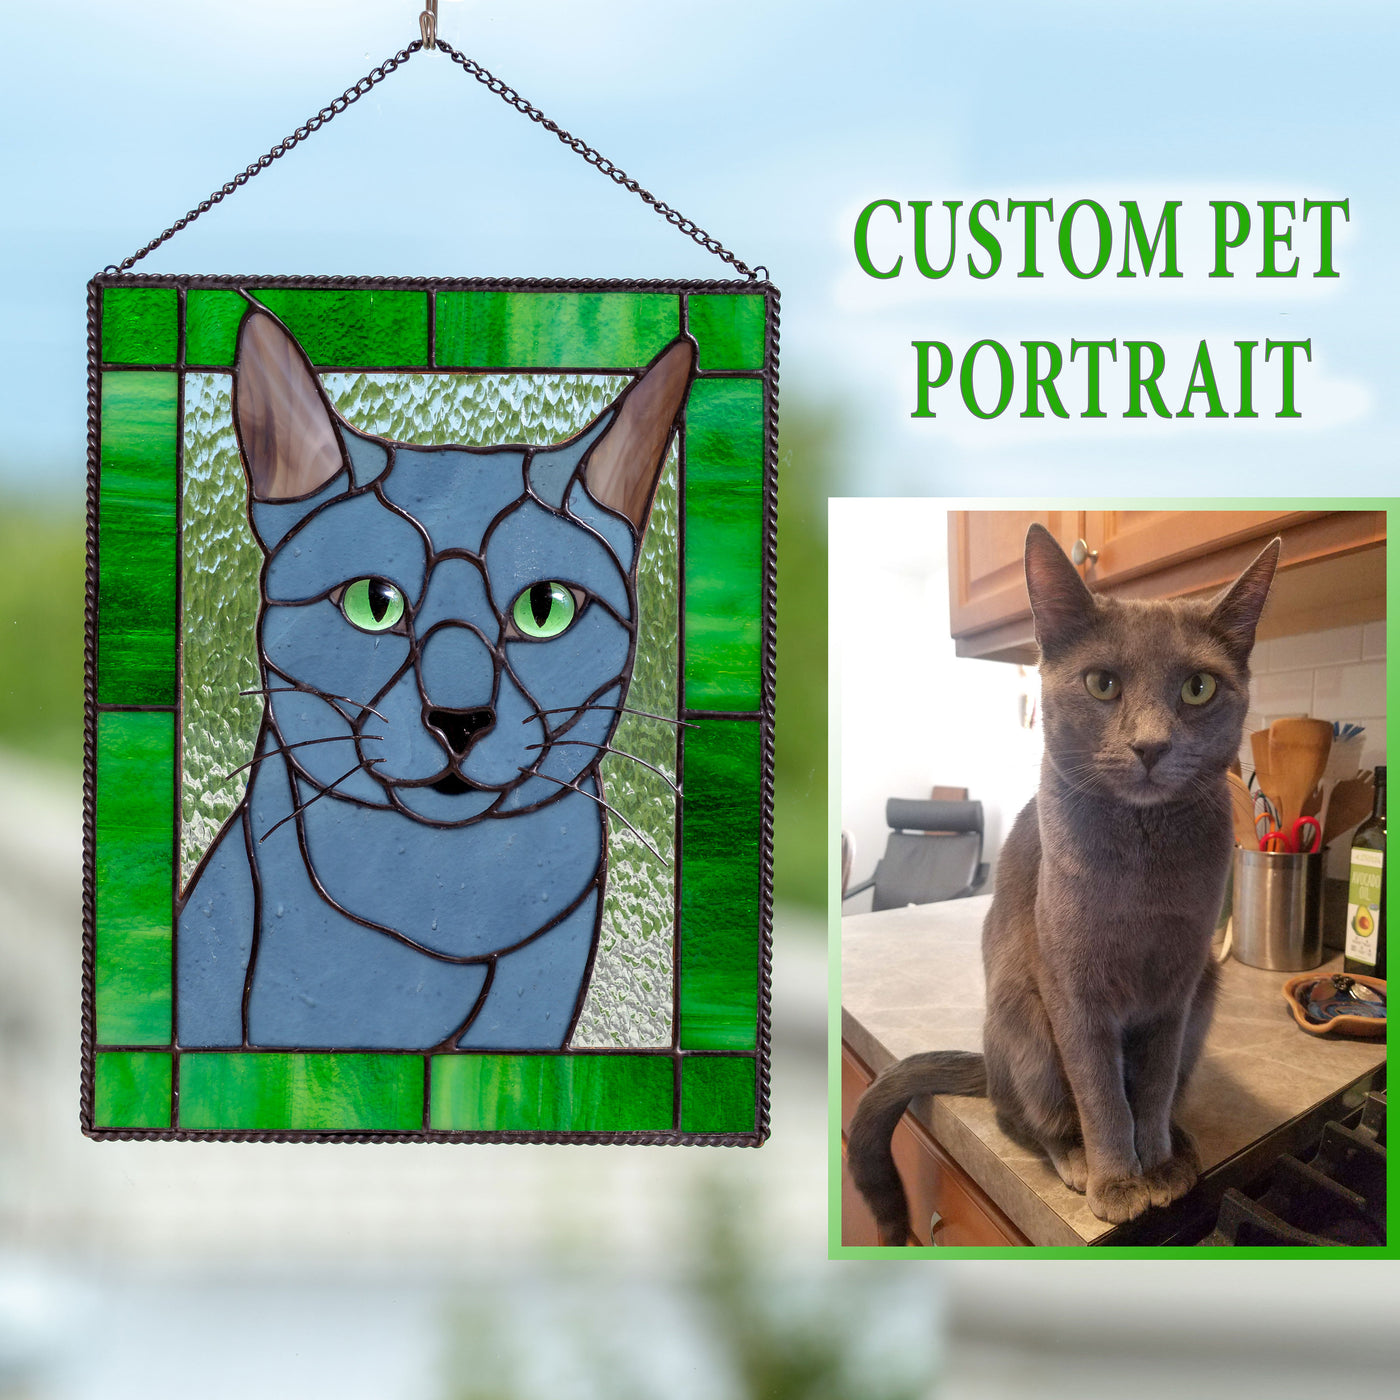 Rectangular portrait of a cat of stained glass